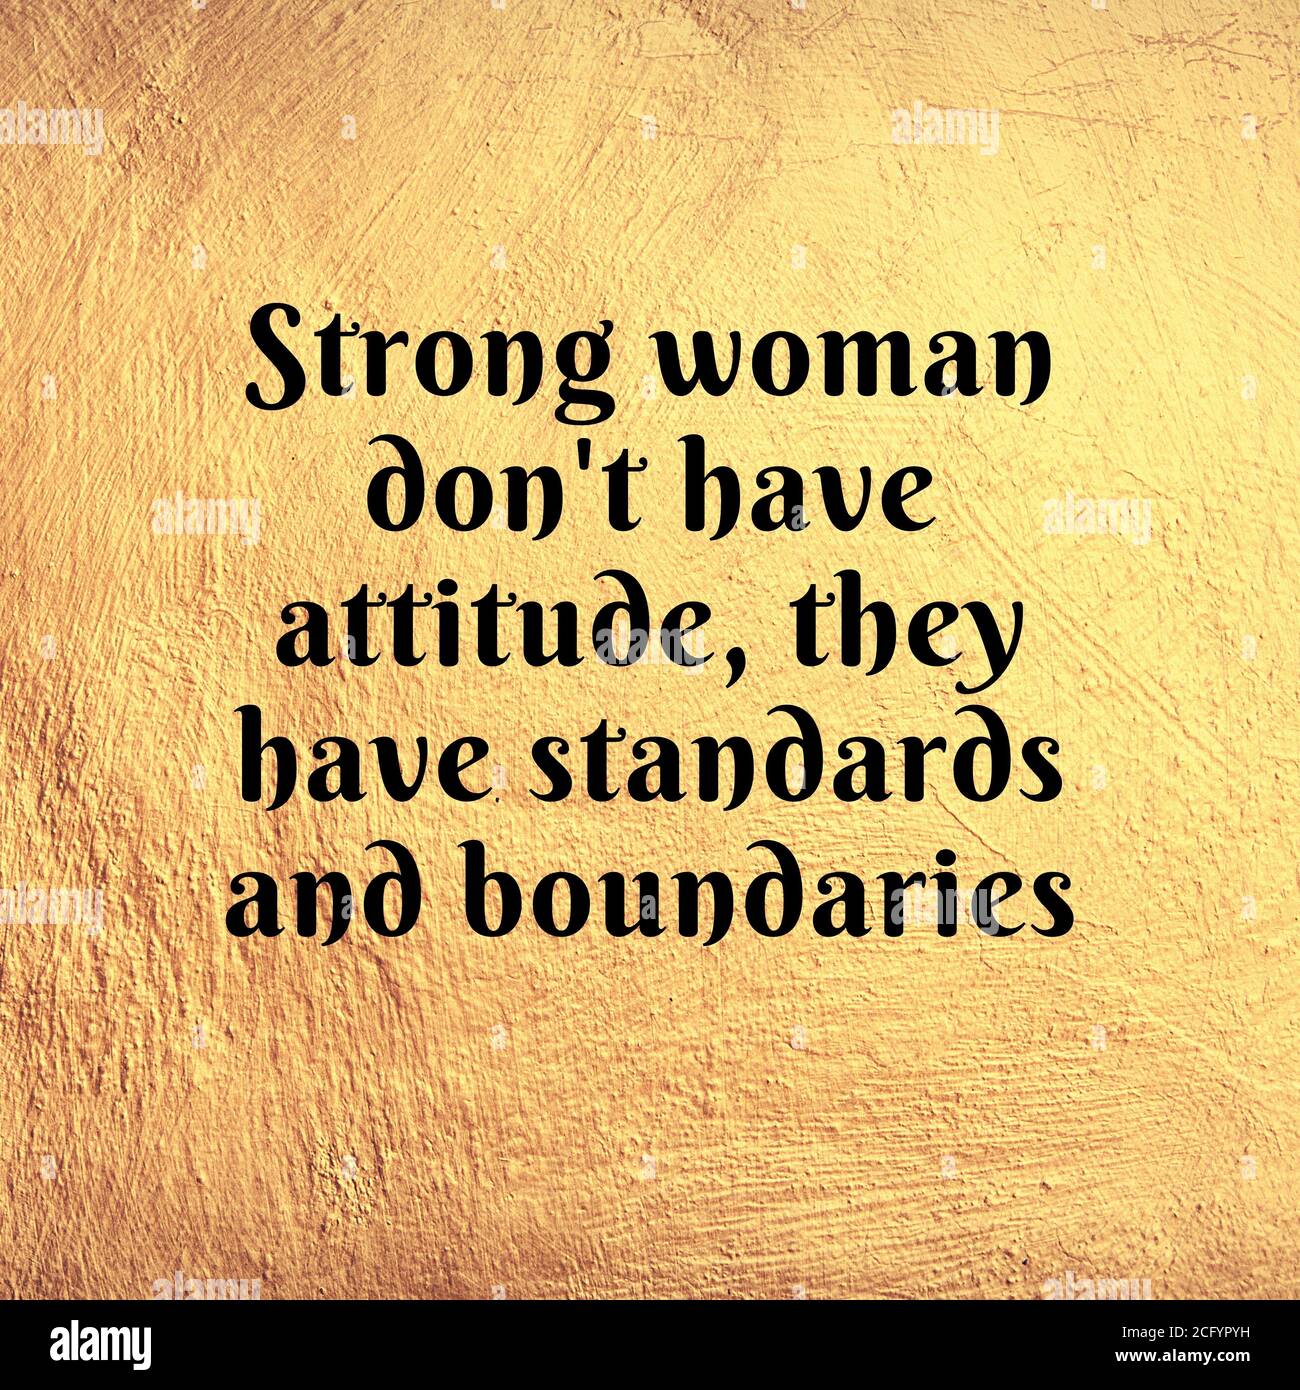 Inspirational quotes. Strong woman don't have attitude, they have standards and boundaries. Stock Photo